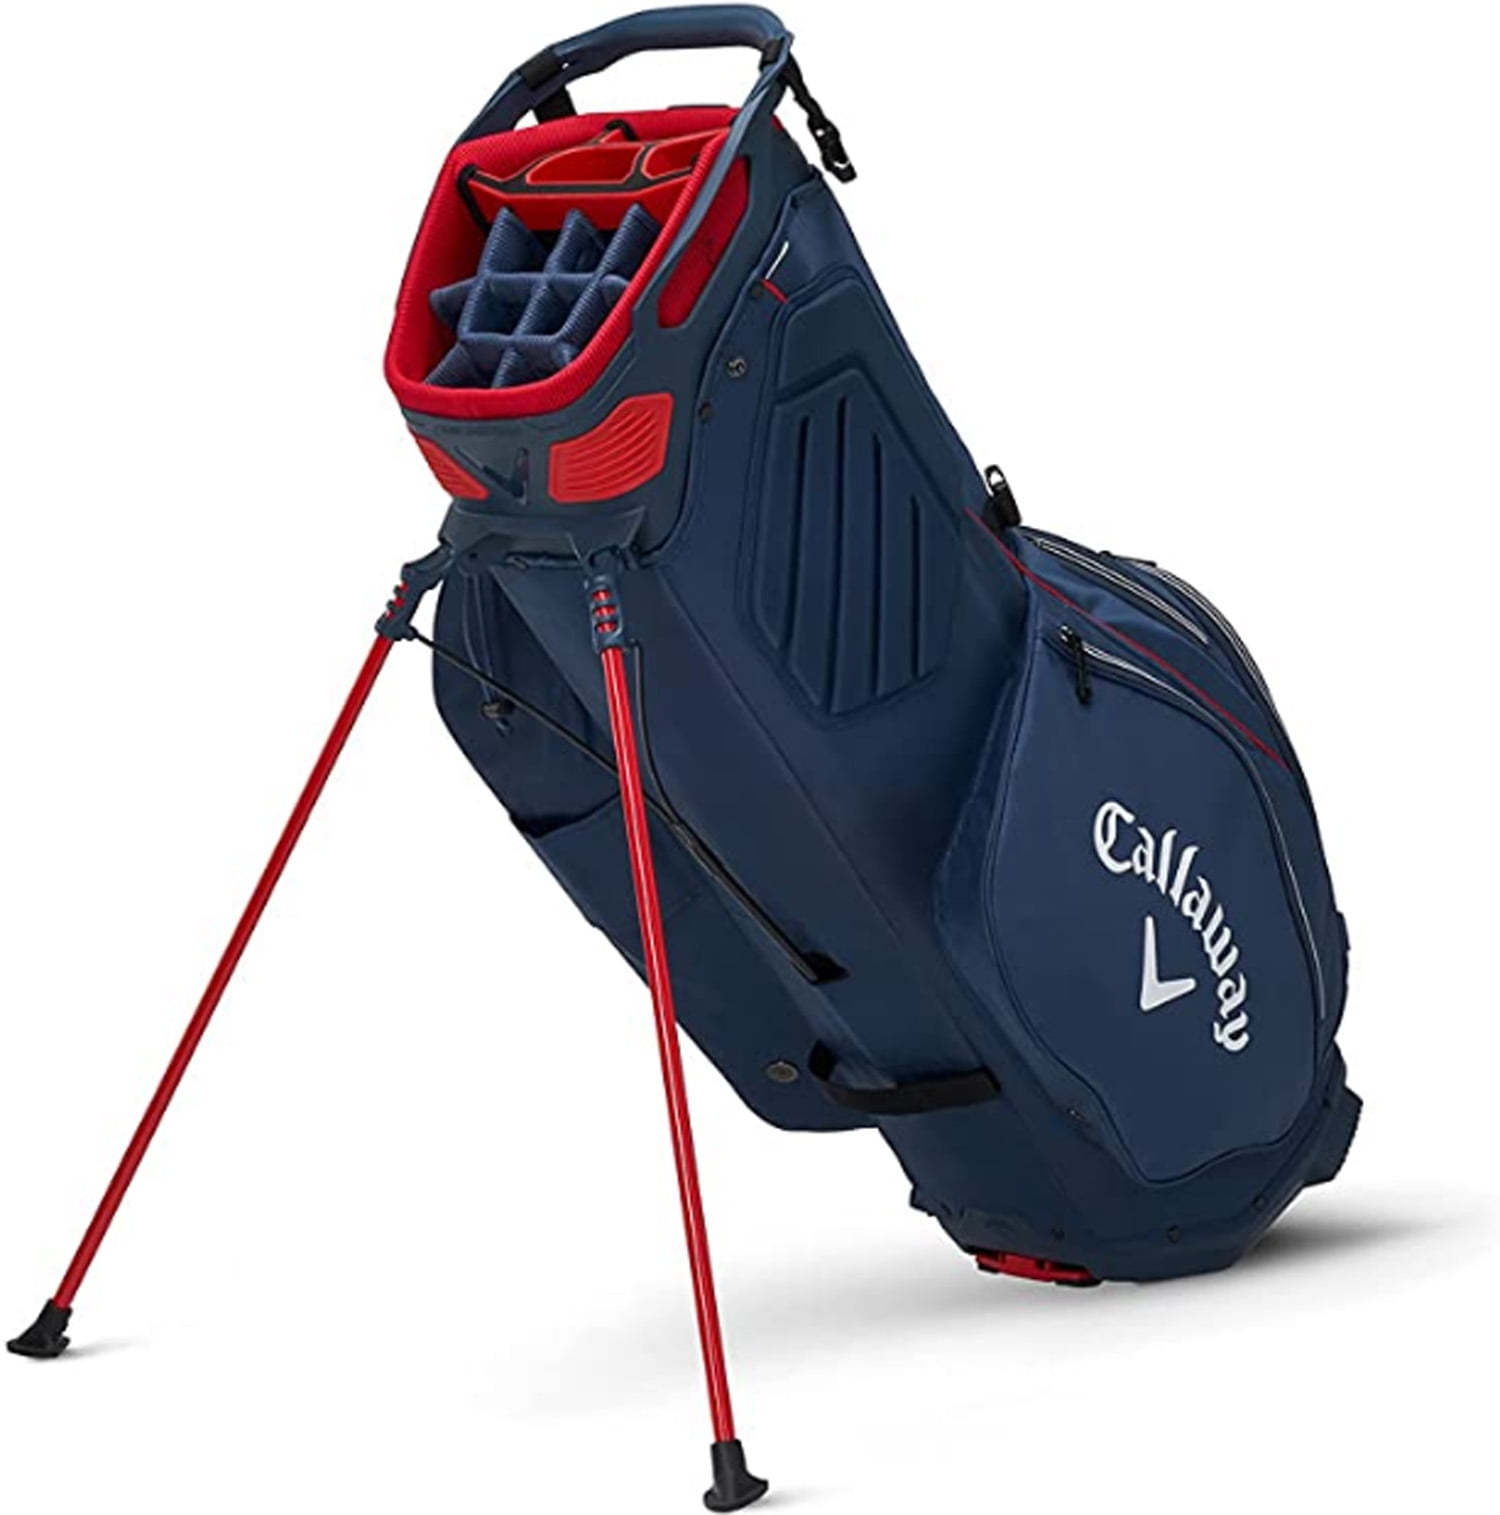 NEW 2022 Callaway Golf Fairway 14 Navy/Red/White Double Strap Stand Golf Bag